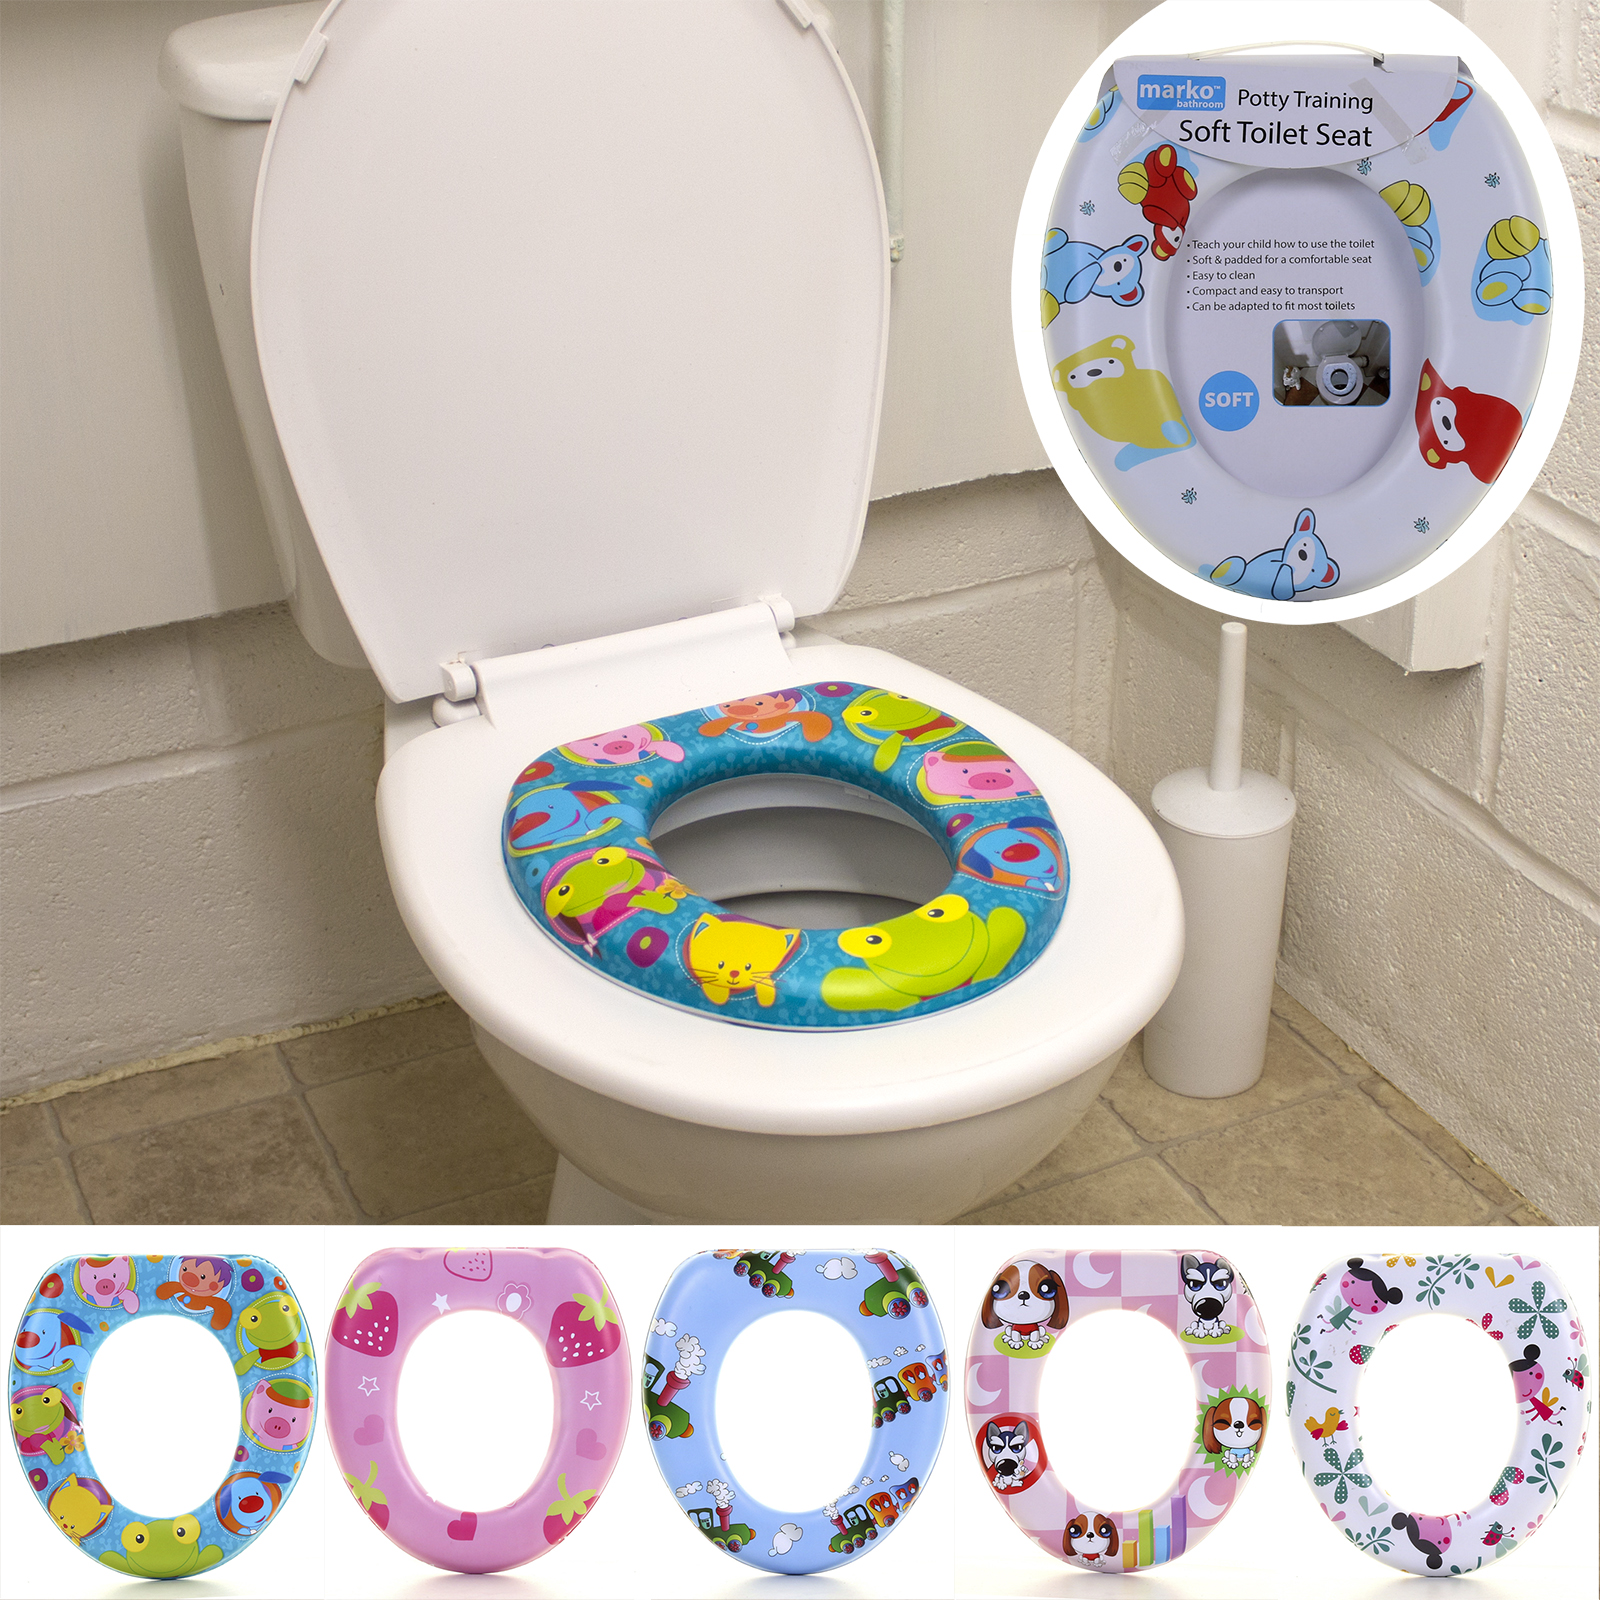 baby toilet seat home bargains Toilet seat babies comfortable padded soft trainer baby